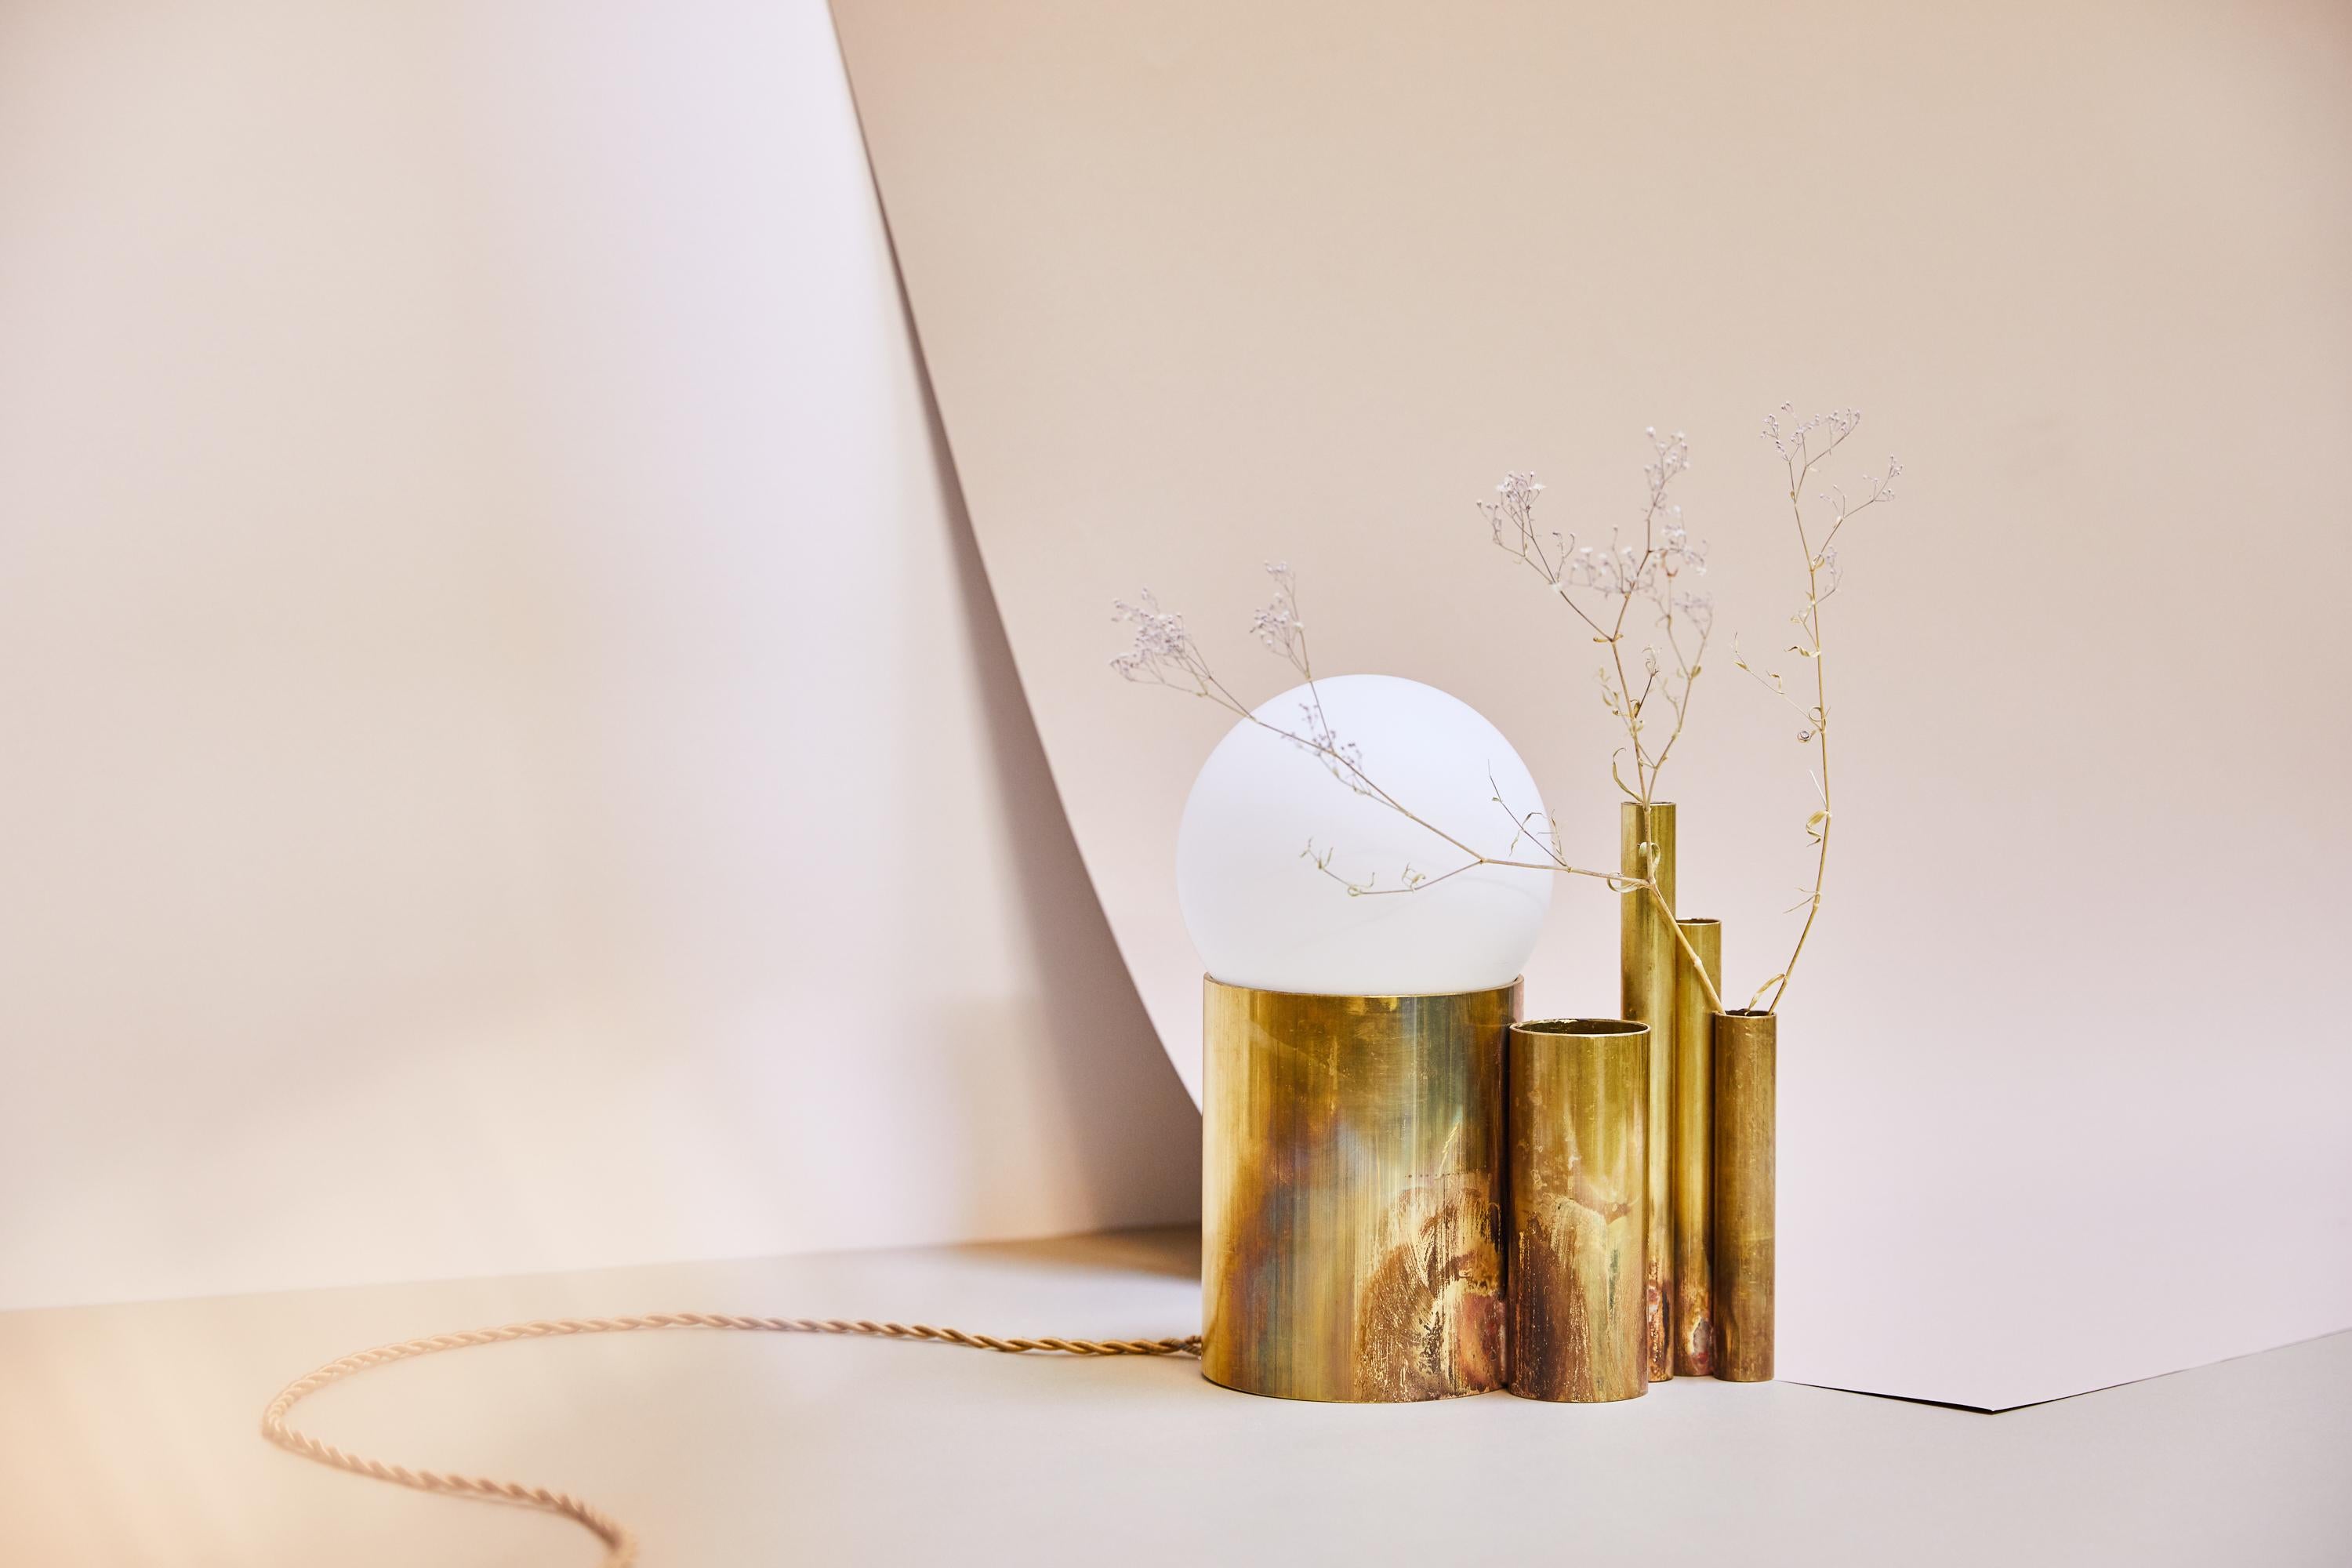 Amalgam II, brass table lamp signed by Pia Chevalier
Raw brass, silver solders and porcelain.
Dimensions 19 cm x 19 cm
Exists also in Large: 24 cm x 28 cm
Tala bulb diameter 13 cm
Cable length 1m50

Pia Chevalier is a French contemporary